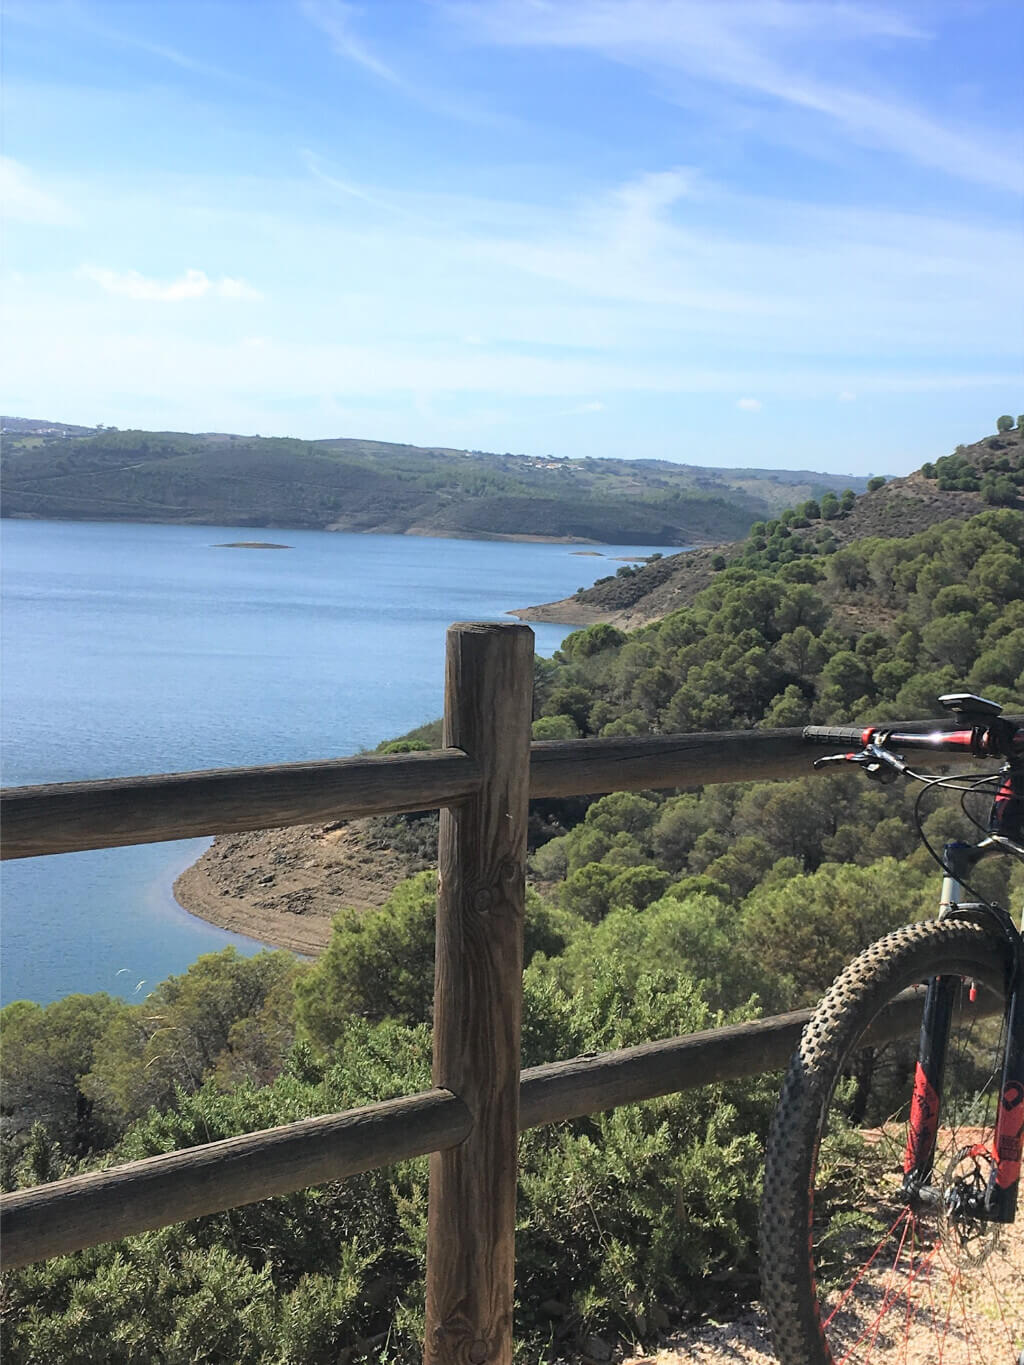 Algarve Cycling Tours - <br />
<b>Notice</b>:  Trying to access array offset on value of type bool in <b>/home/acyclingcom/public_html/tour-detail.php</b> on line <b>253</b><br />
 - MTB Trans-Algarve Hinterland Algarviana Tour 3.18